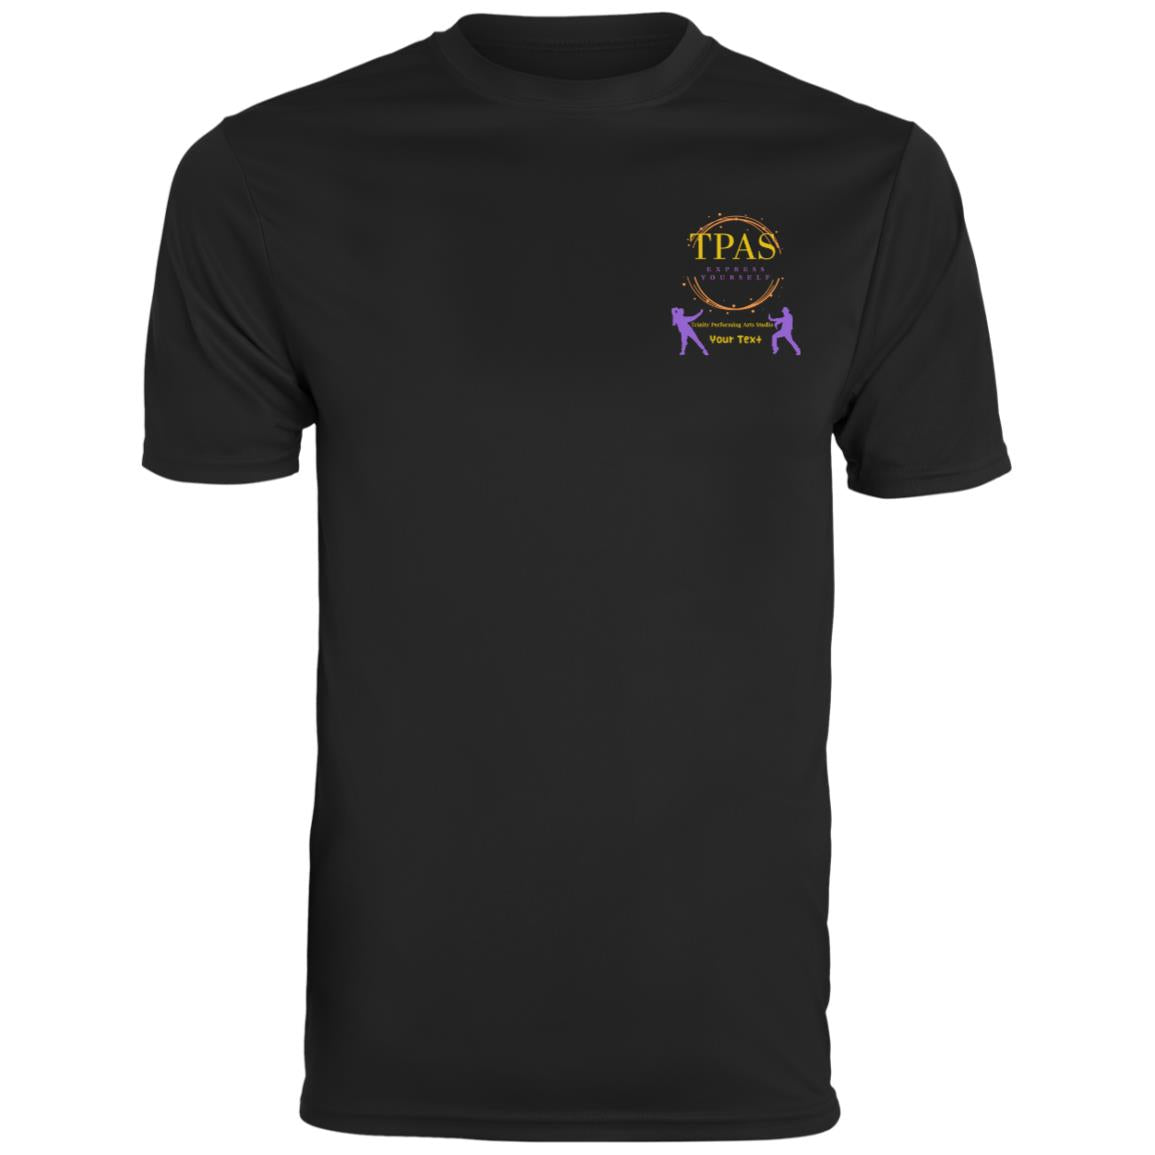 TPAS Competition Team Youth Moisture-Wicking Tee